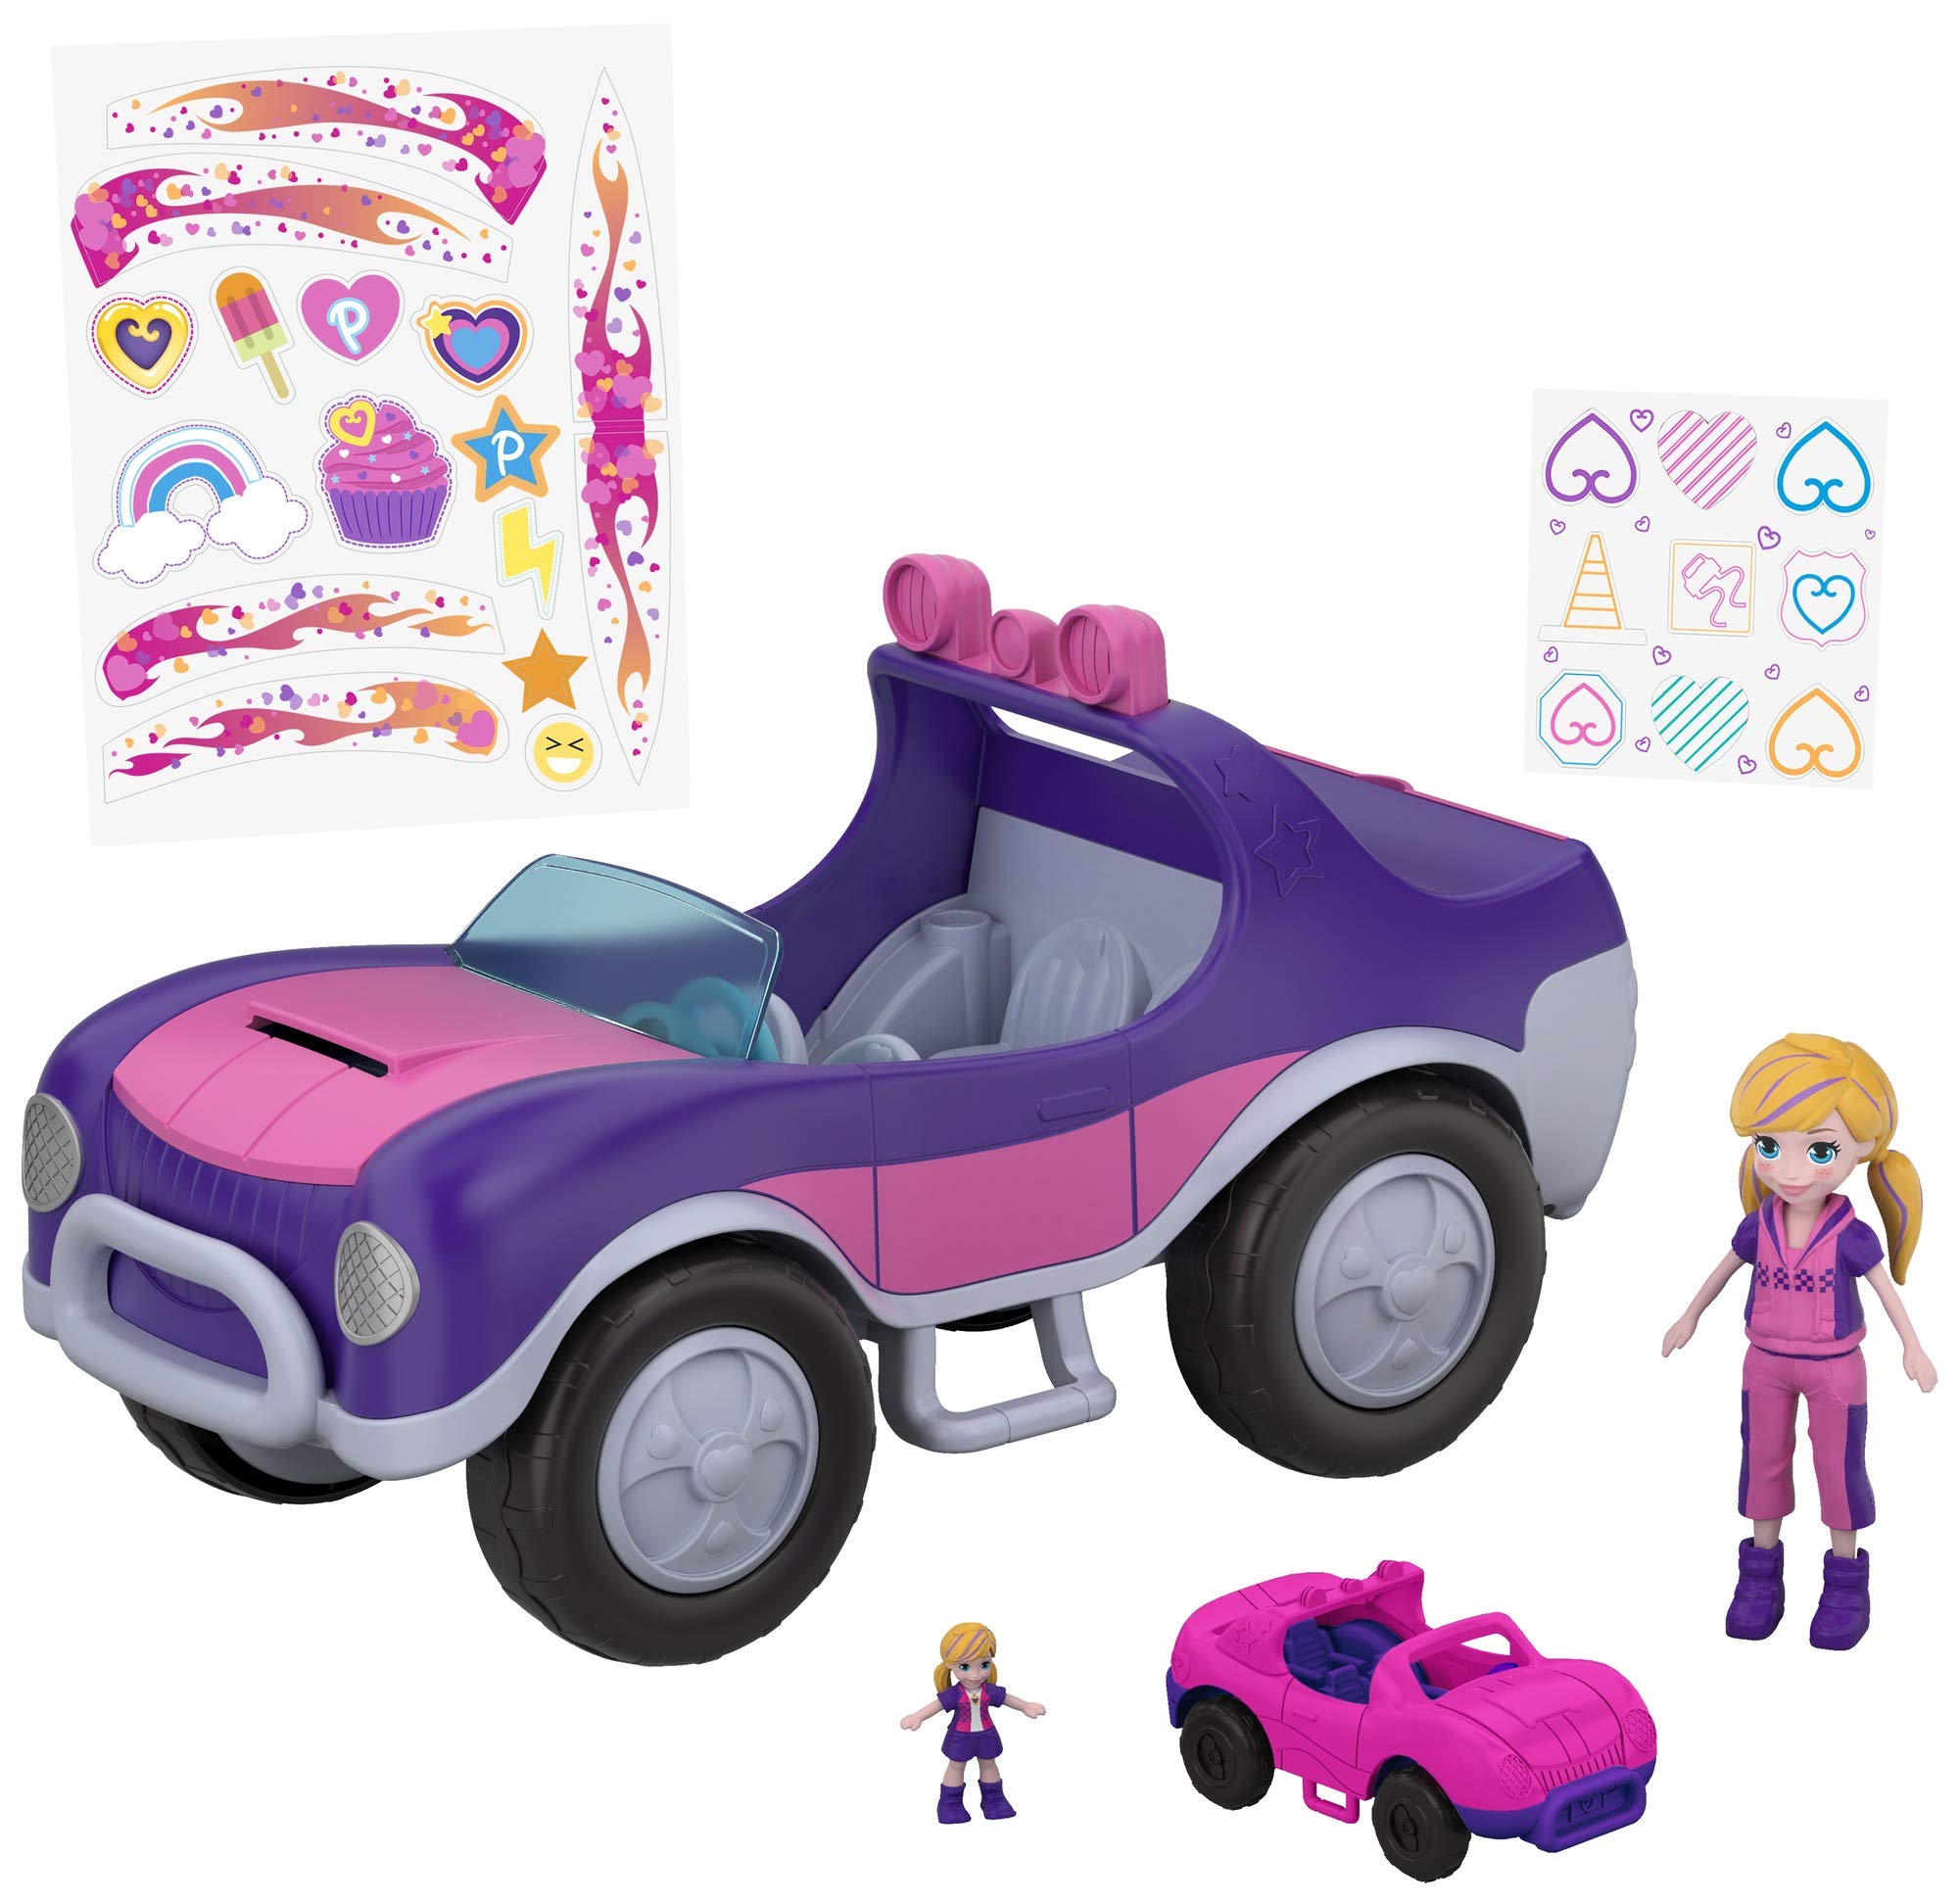 Polly Pocket 2-In-1 Travel Toy Playset, Spin 'N Surprise Smoothie with  Micro Polly & Lila Dolls, Plus 25 Accessories